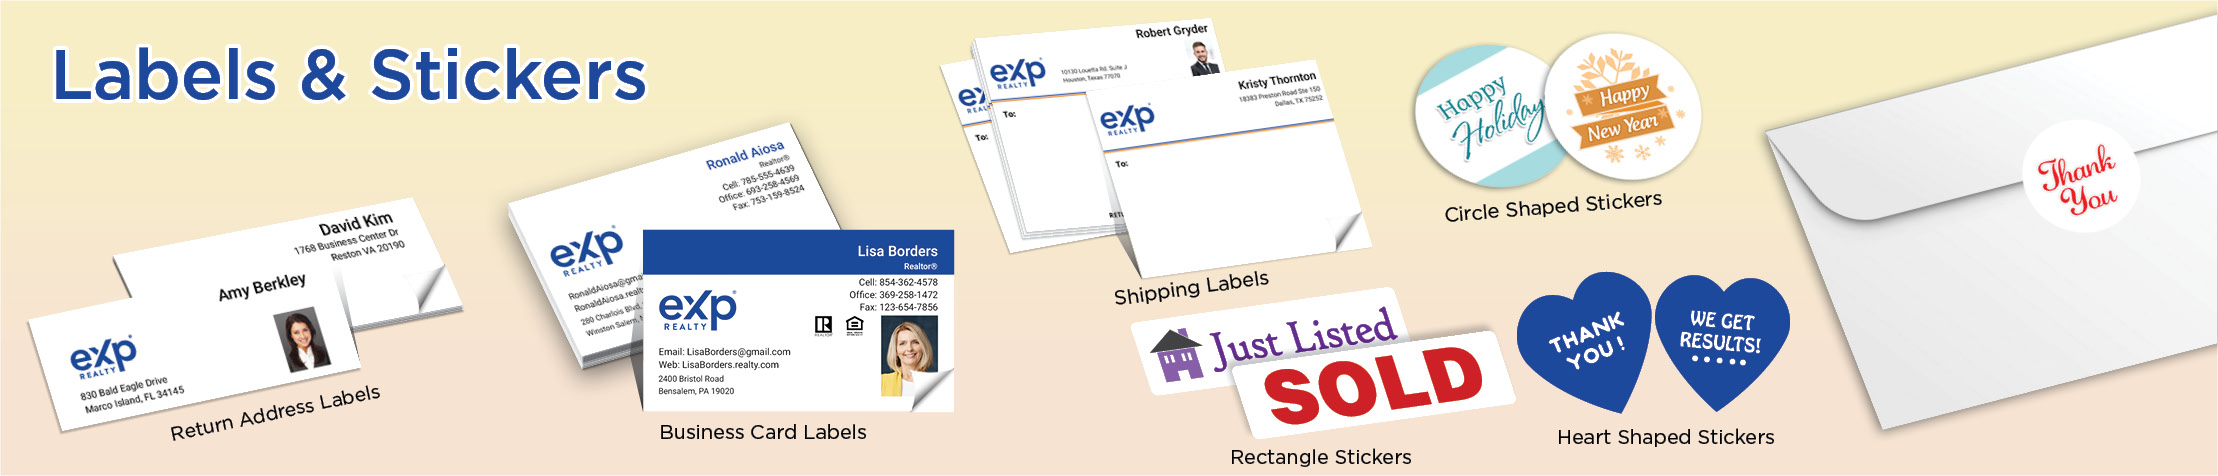 Real Estate Labels and Stickers -  business card labels, return address labels, shipping labels, and assorted stickers | BestPrintBuy.com